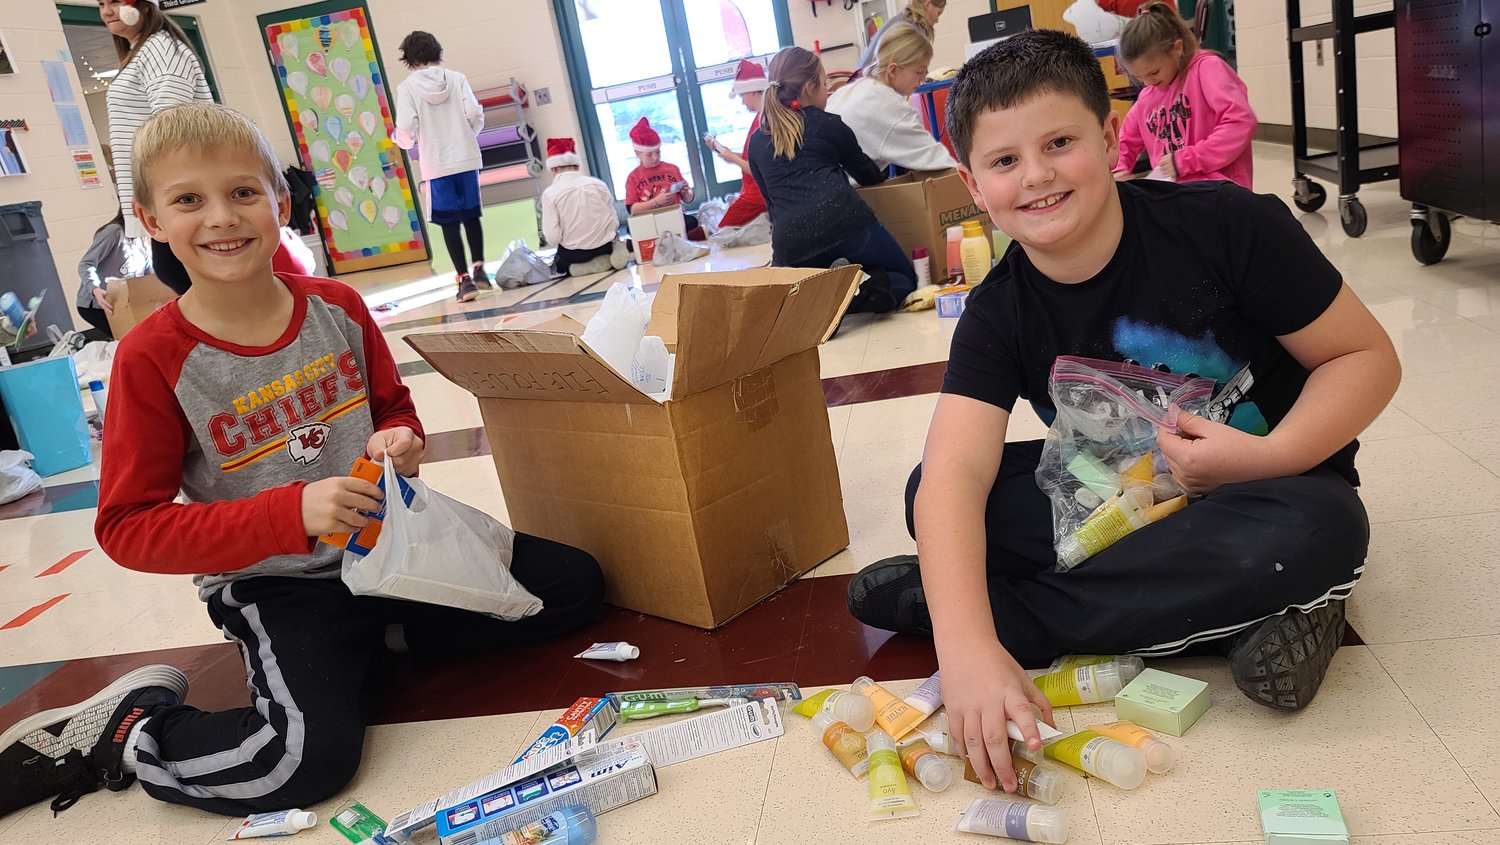 CUB STUDENTS pack hygiene items to donate to the Ozark chapter of Care to Learn, which helps meet the health, hunger and hygiene needs to school-aged children across the Ozarks.